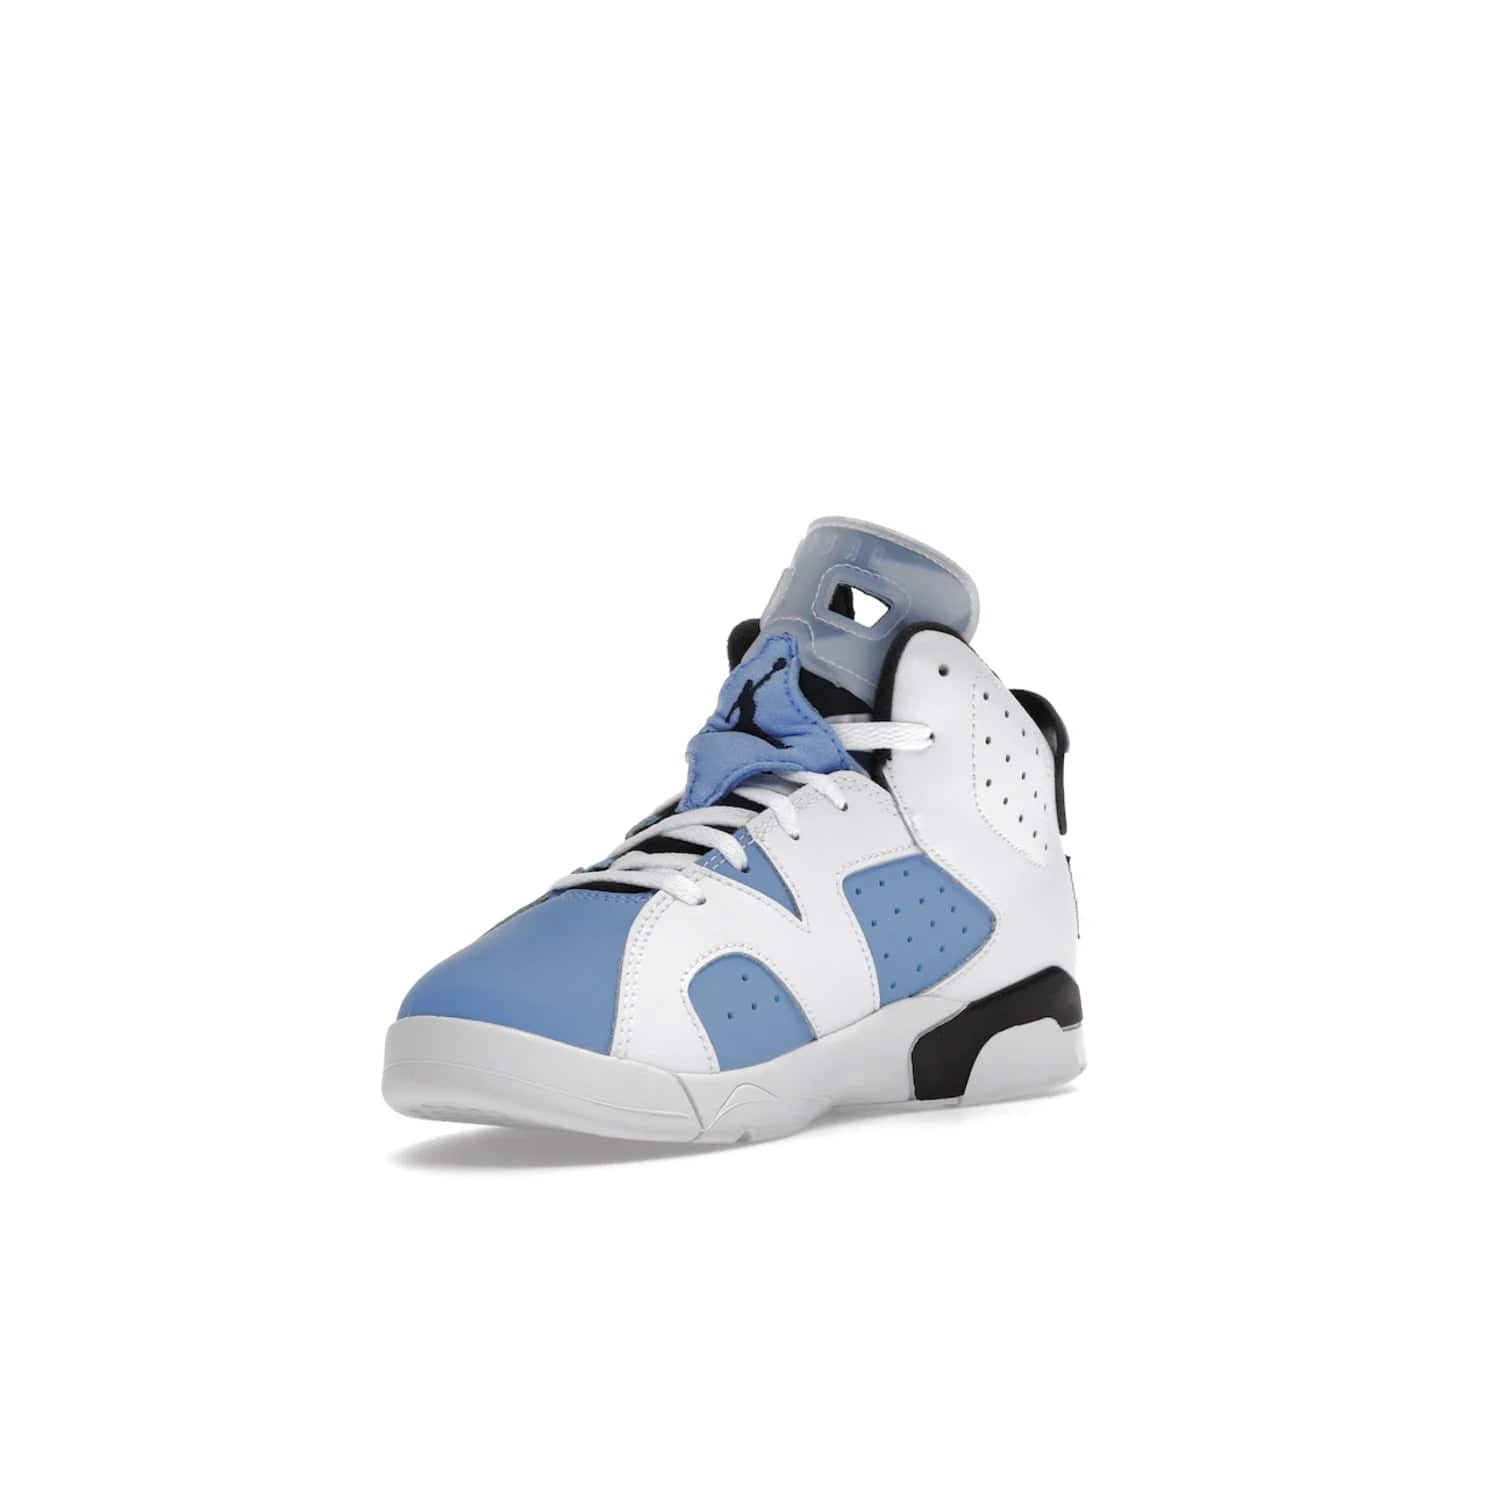 Jordan 6 Retro UNC White (PS) - Image 14 - Only at www.BallersClubKickz.com - The Air Jordan 6 Retro UNC White PS celebrates Michael Jordan's alma mater, the University of North Carolina. It features a classic color-blocking of the iconic Jordan 6 Carmine and a stitched Jordan Team patch. This must-have sneaker released on April 27th, 2022. Referencing the university colors, get this shoe for a stylish and timeless style with university pride.